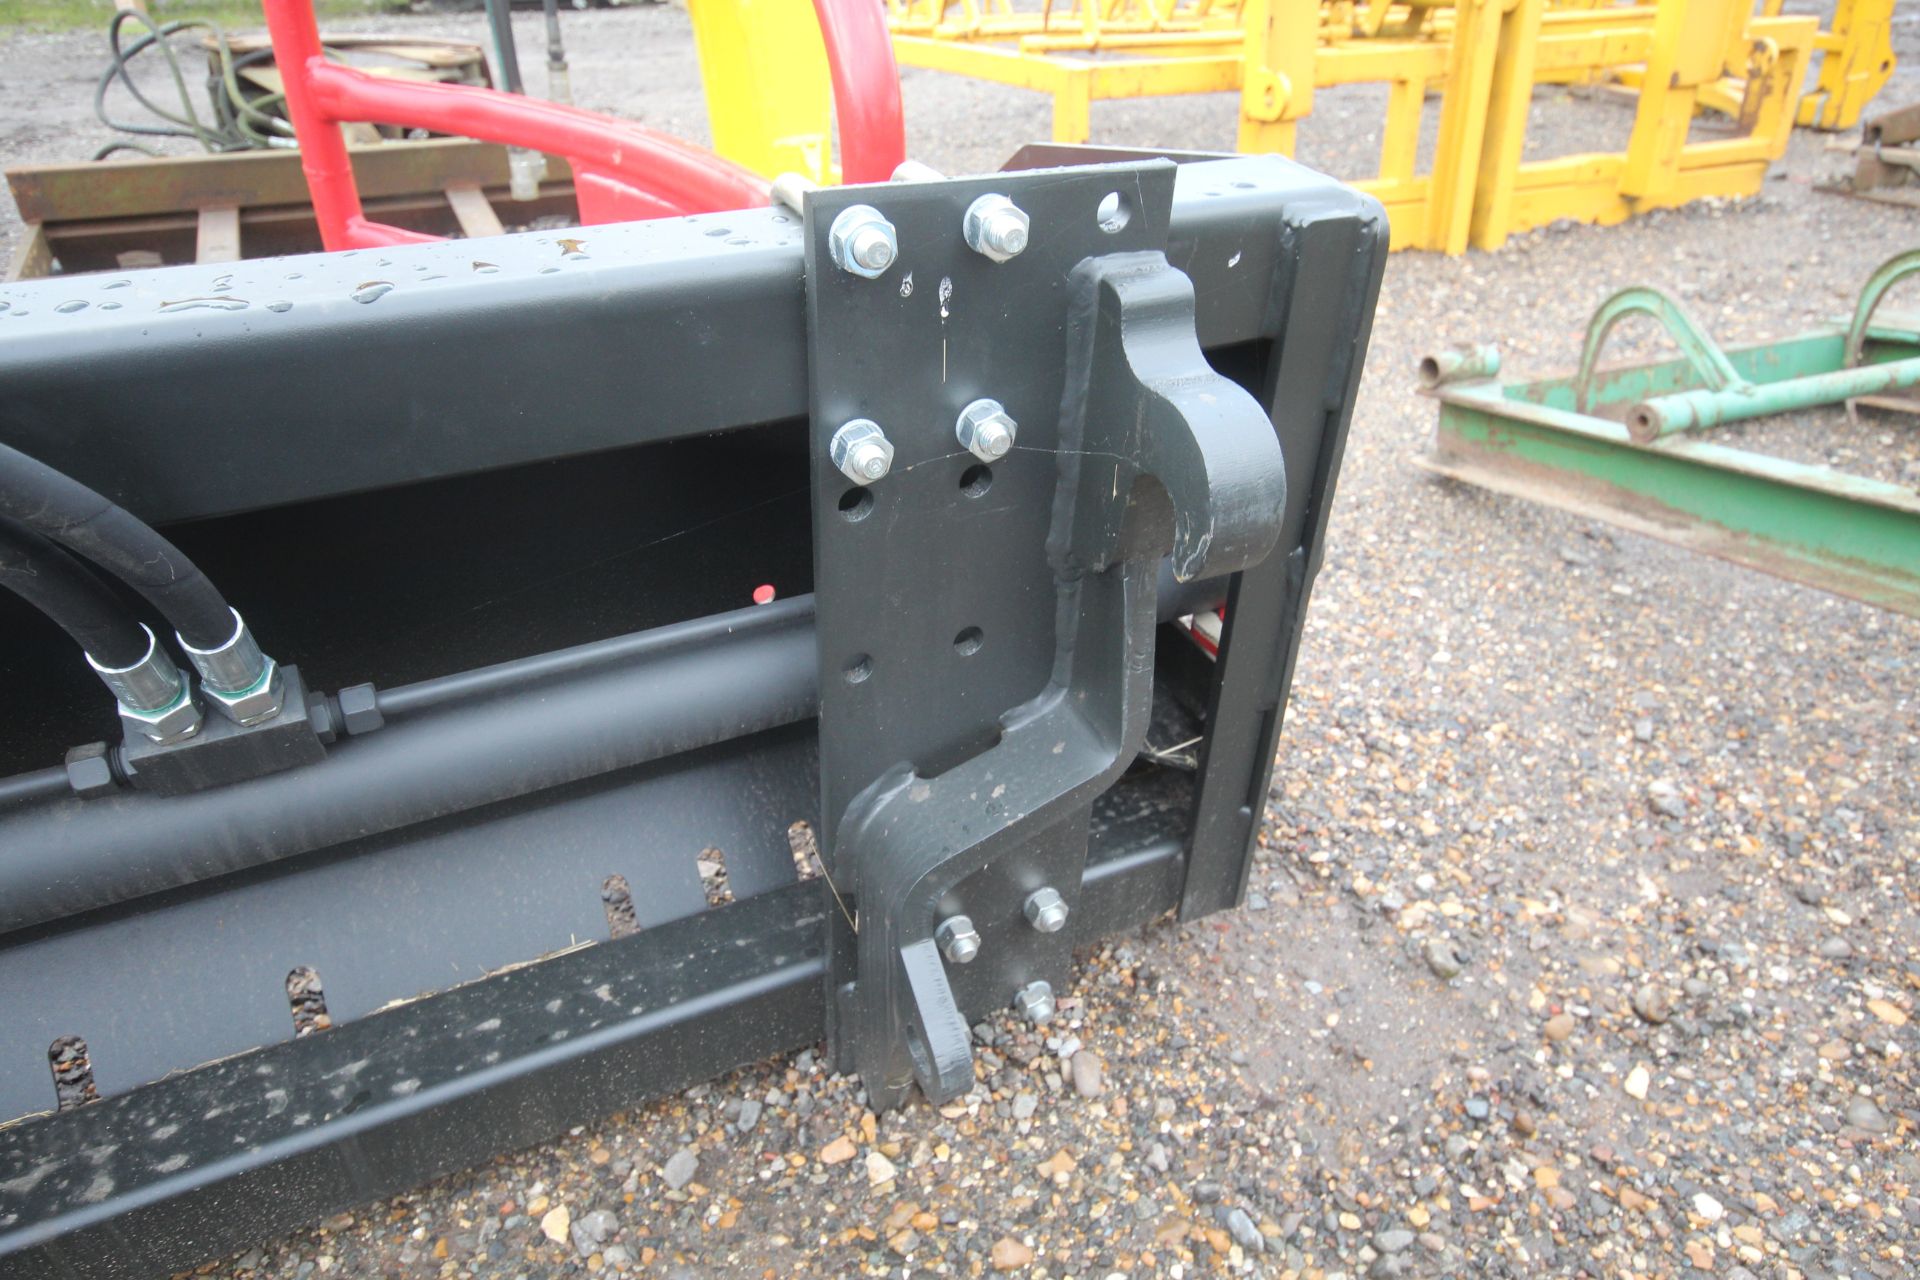 MX Manubal C40 bale squeeze. 2022. Euro 8 brackets. Owned from new. For sale due to retirement. V - Image 7 of 15